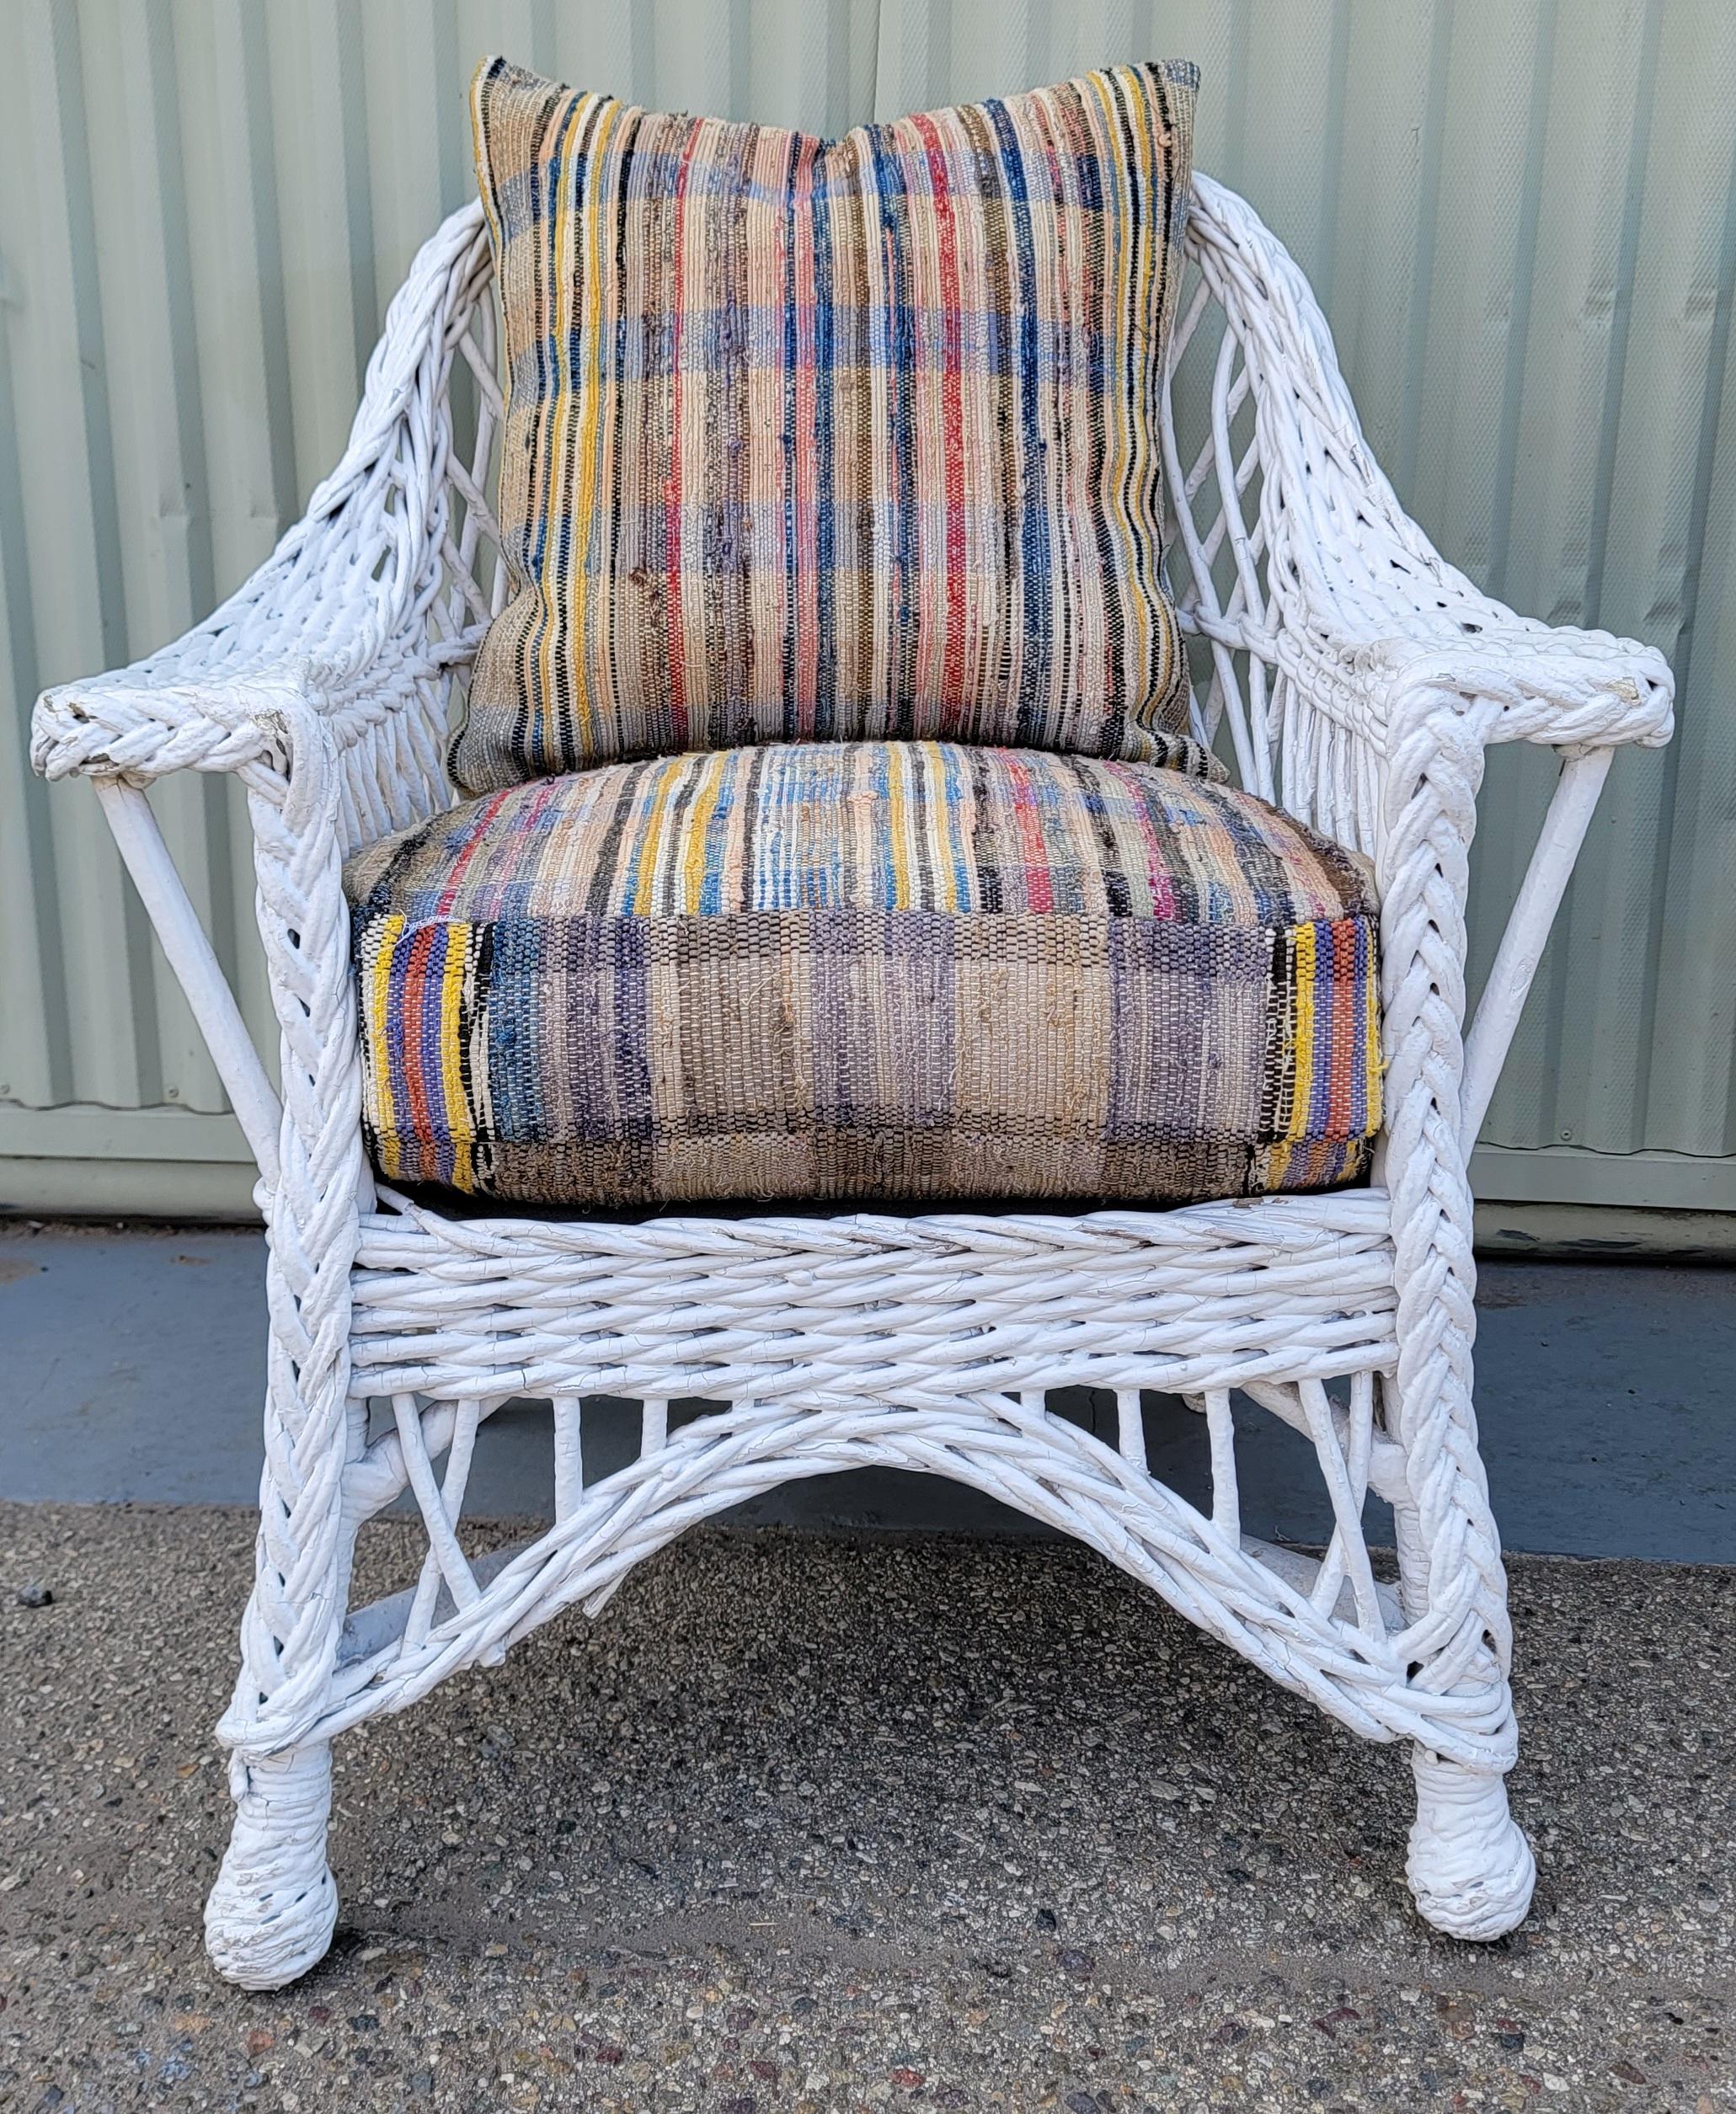 20Thc Haywood Wakefield original white painted wicker settee & matching arm chair. This amazing original white wicker set is in fine & very strong and sturdy design/condition. 
The set is newly upholstered in vintage cotton double sided custom rag